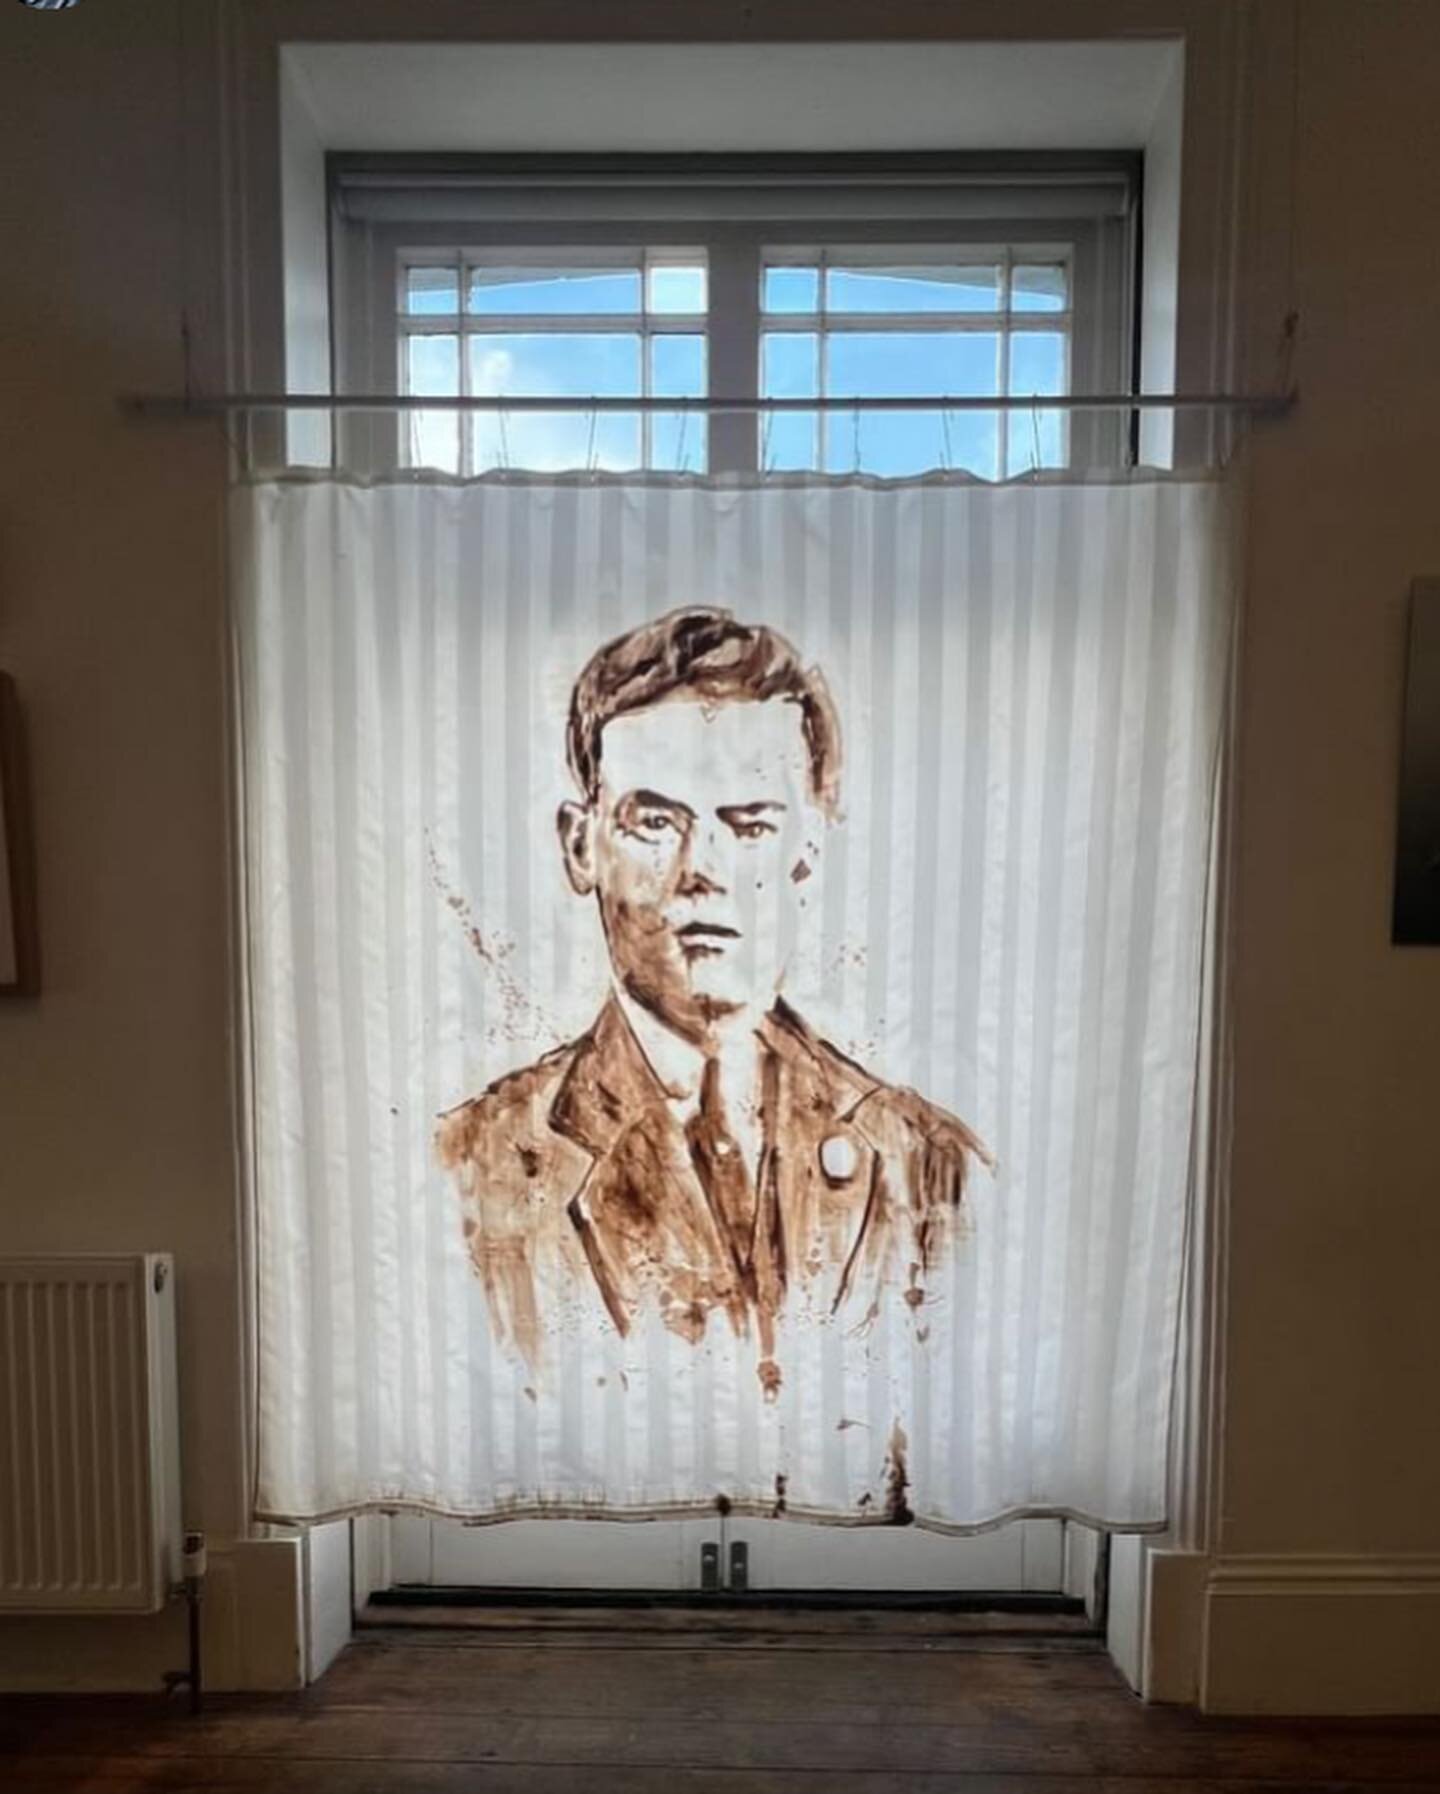 &lsquo;When is a HOME not a HOME&rsquo;
Oil paint and  ground particles of disintegrating picture backing, shower curtain, meat hooks

&ldquo;Our family home of 5 generations has been rented since WW2.

My great grandfather, an orphan who aged 12 wal